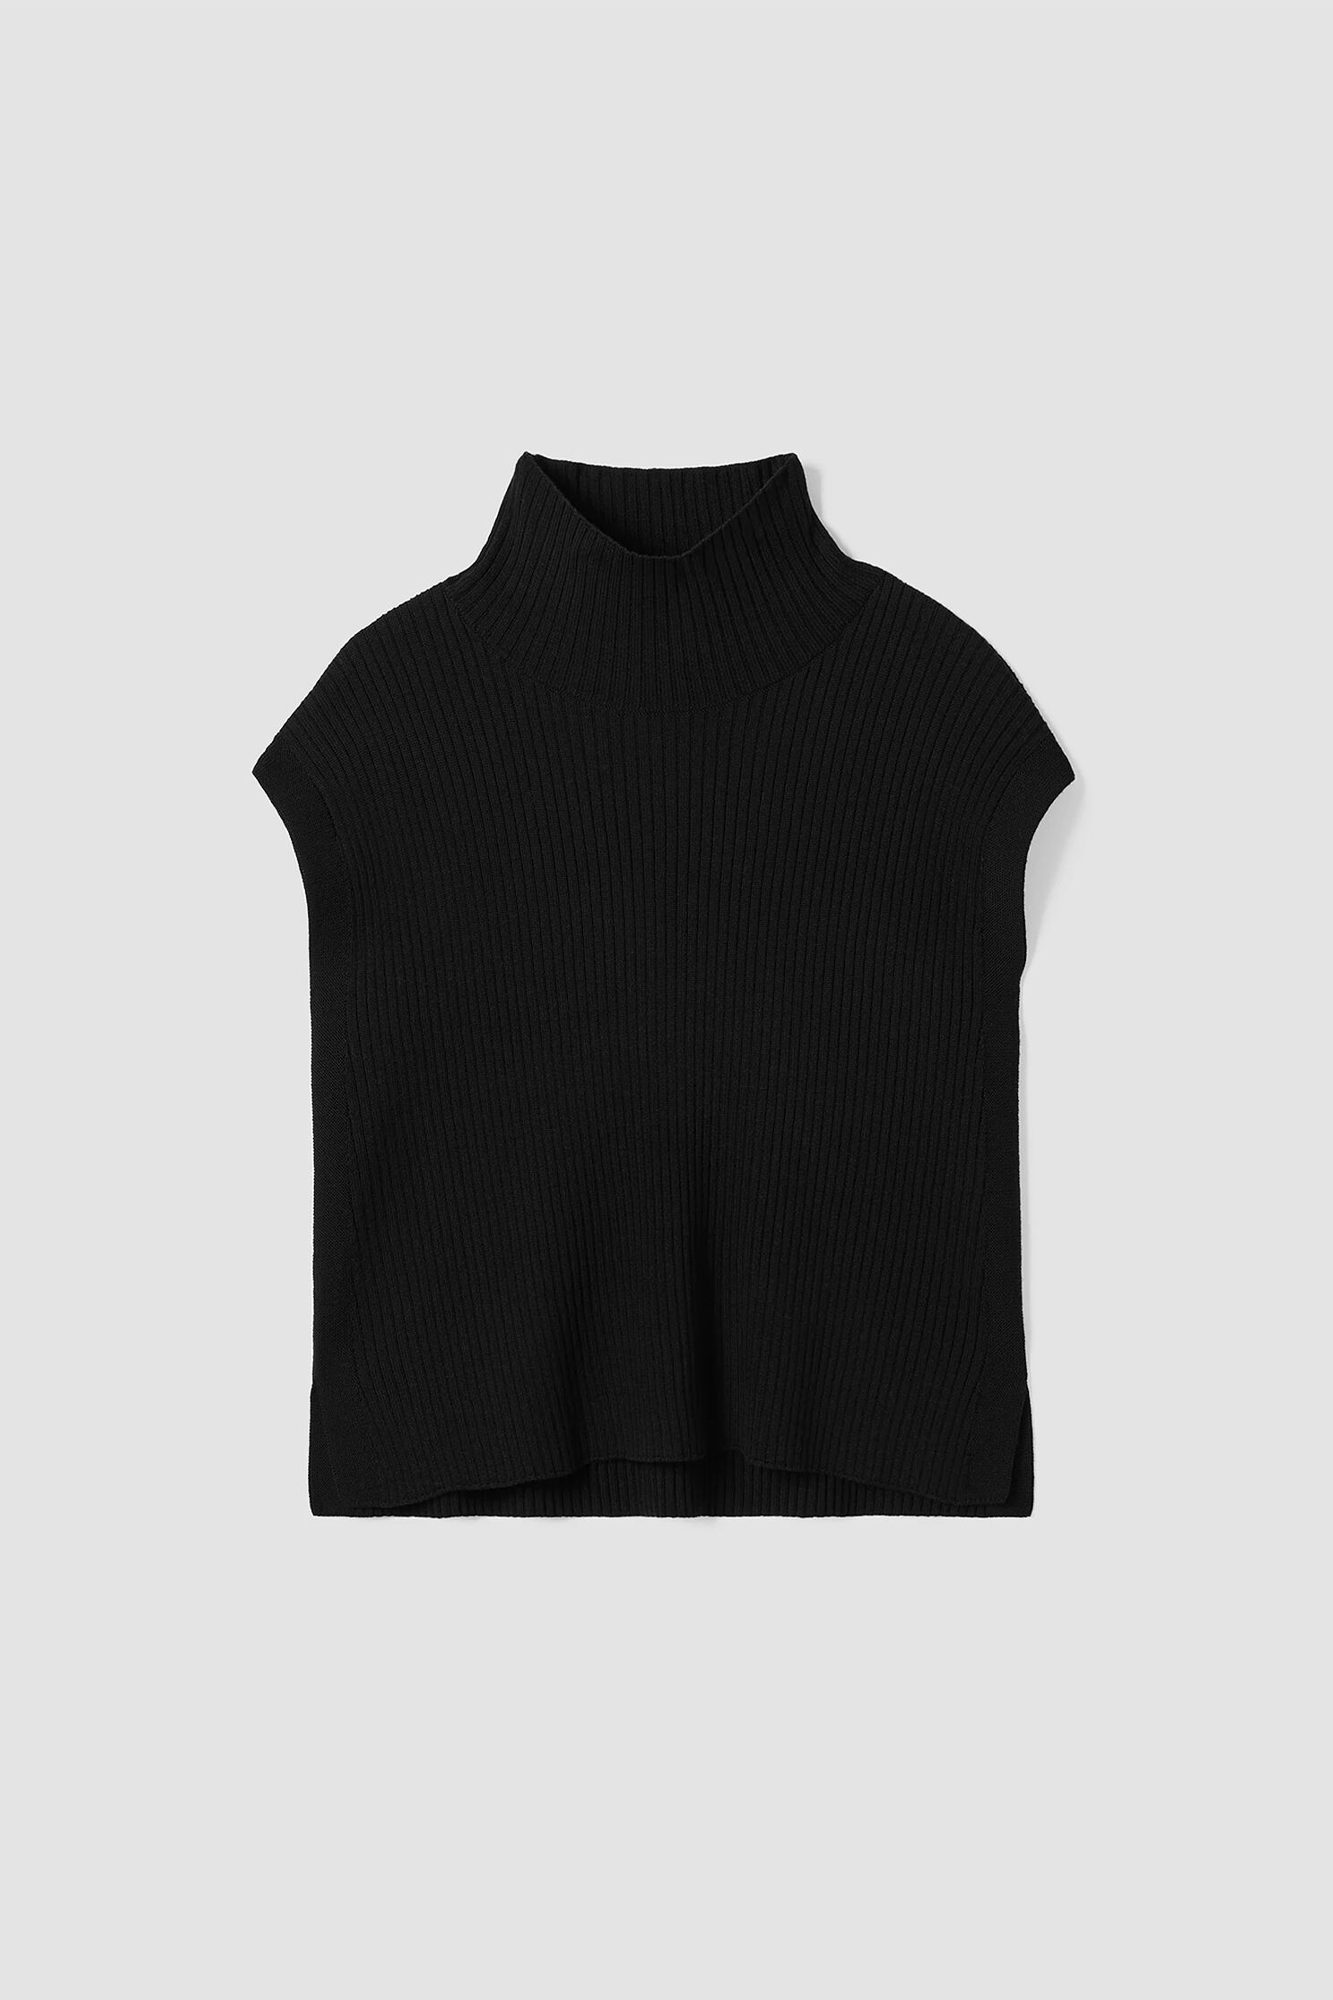 The Sleeveless Turtleneck from Eileen Fisher has an incredibly soft and luxurious feel. Expertly tailored with a timelessly elegant turtleneck and cap sleeves, its relaxed silhouette is finished with side slits for modern sophistication. 